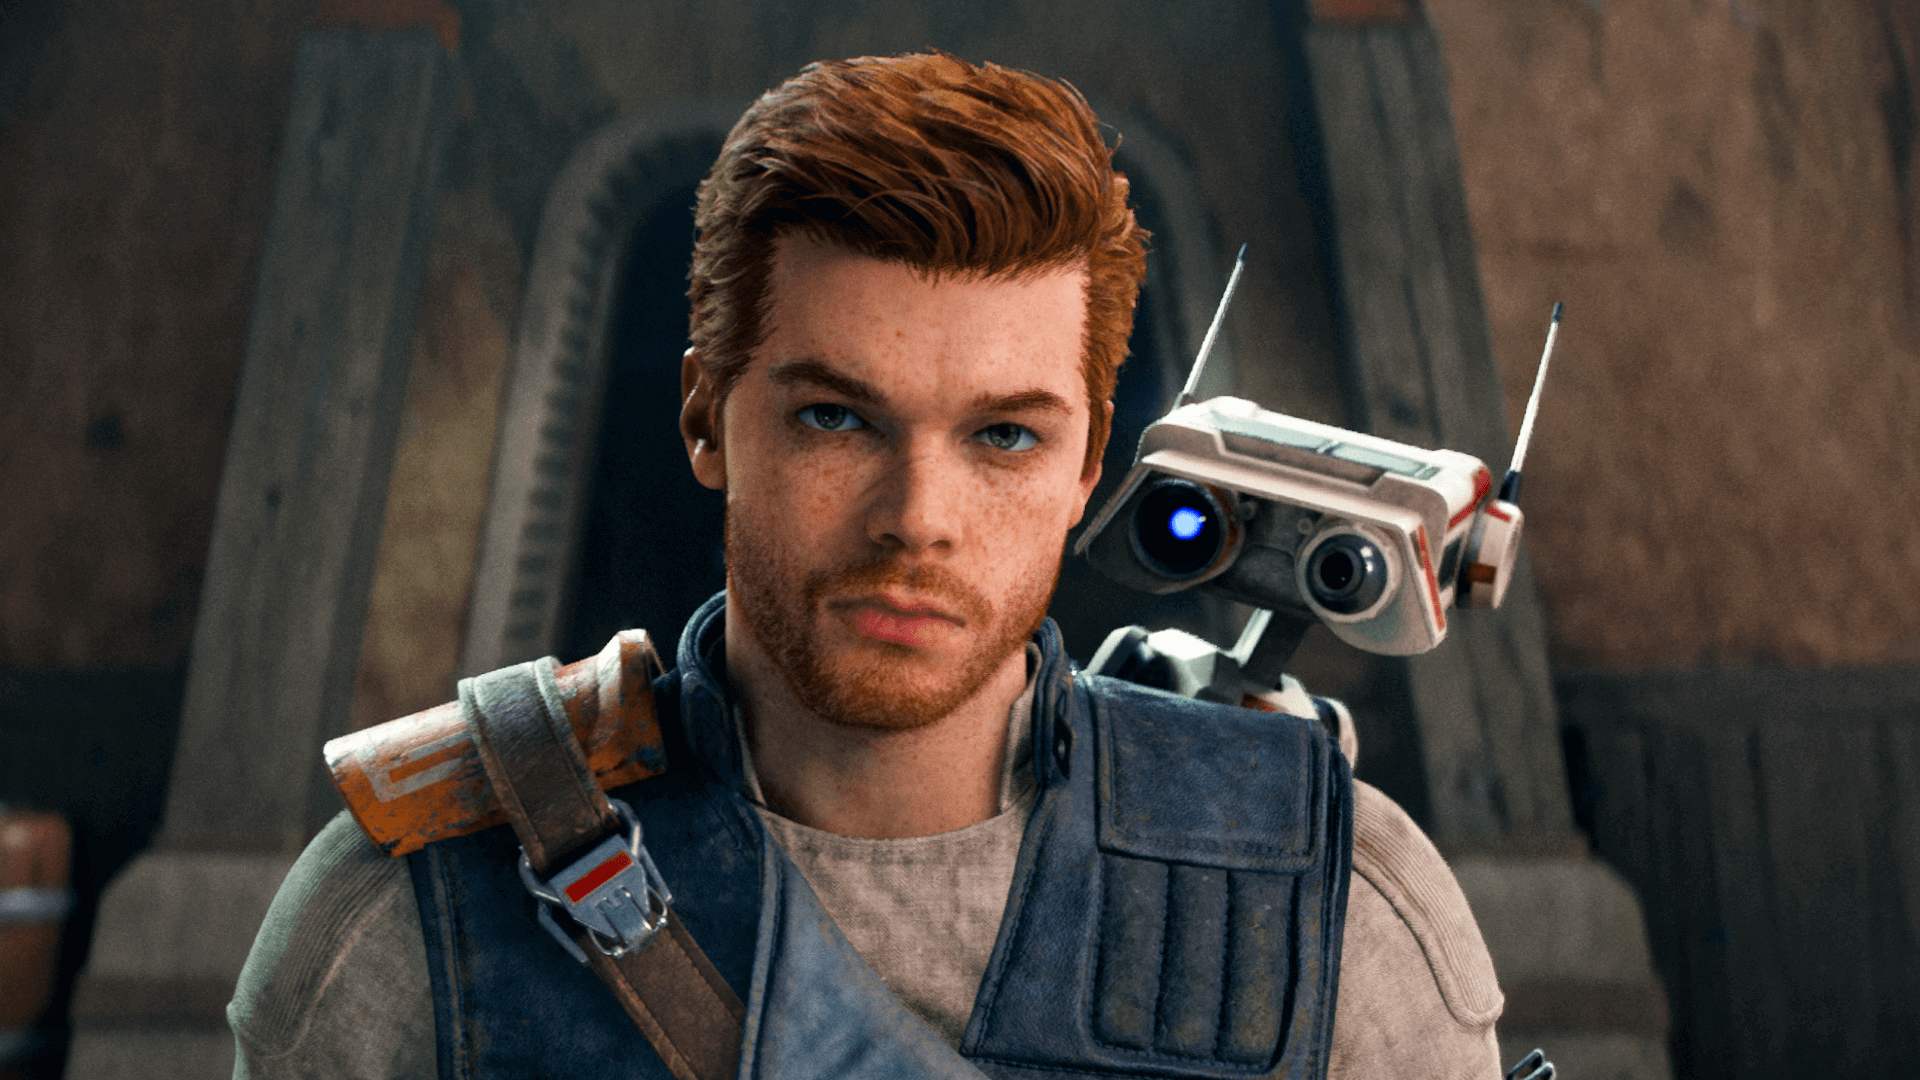 Star Wars Jedi: Survivor PS5 Update Available Now, Here Are the Patch Notes